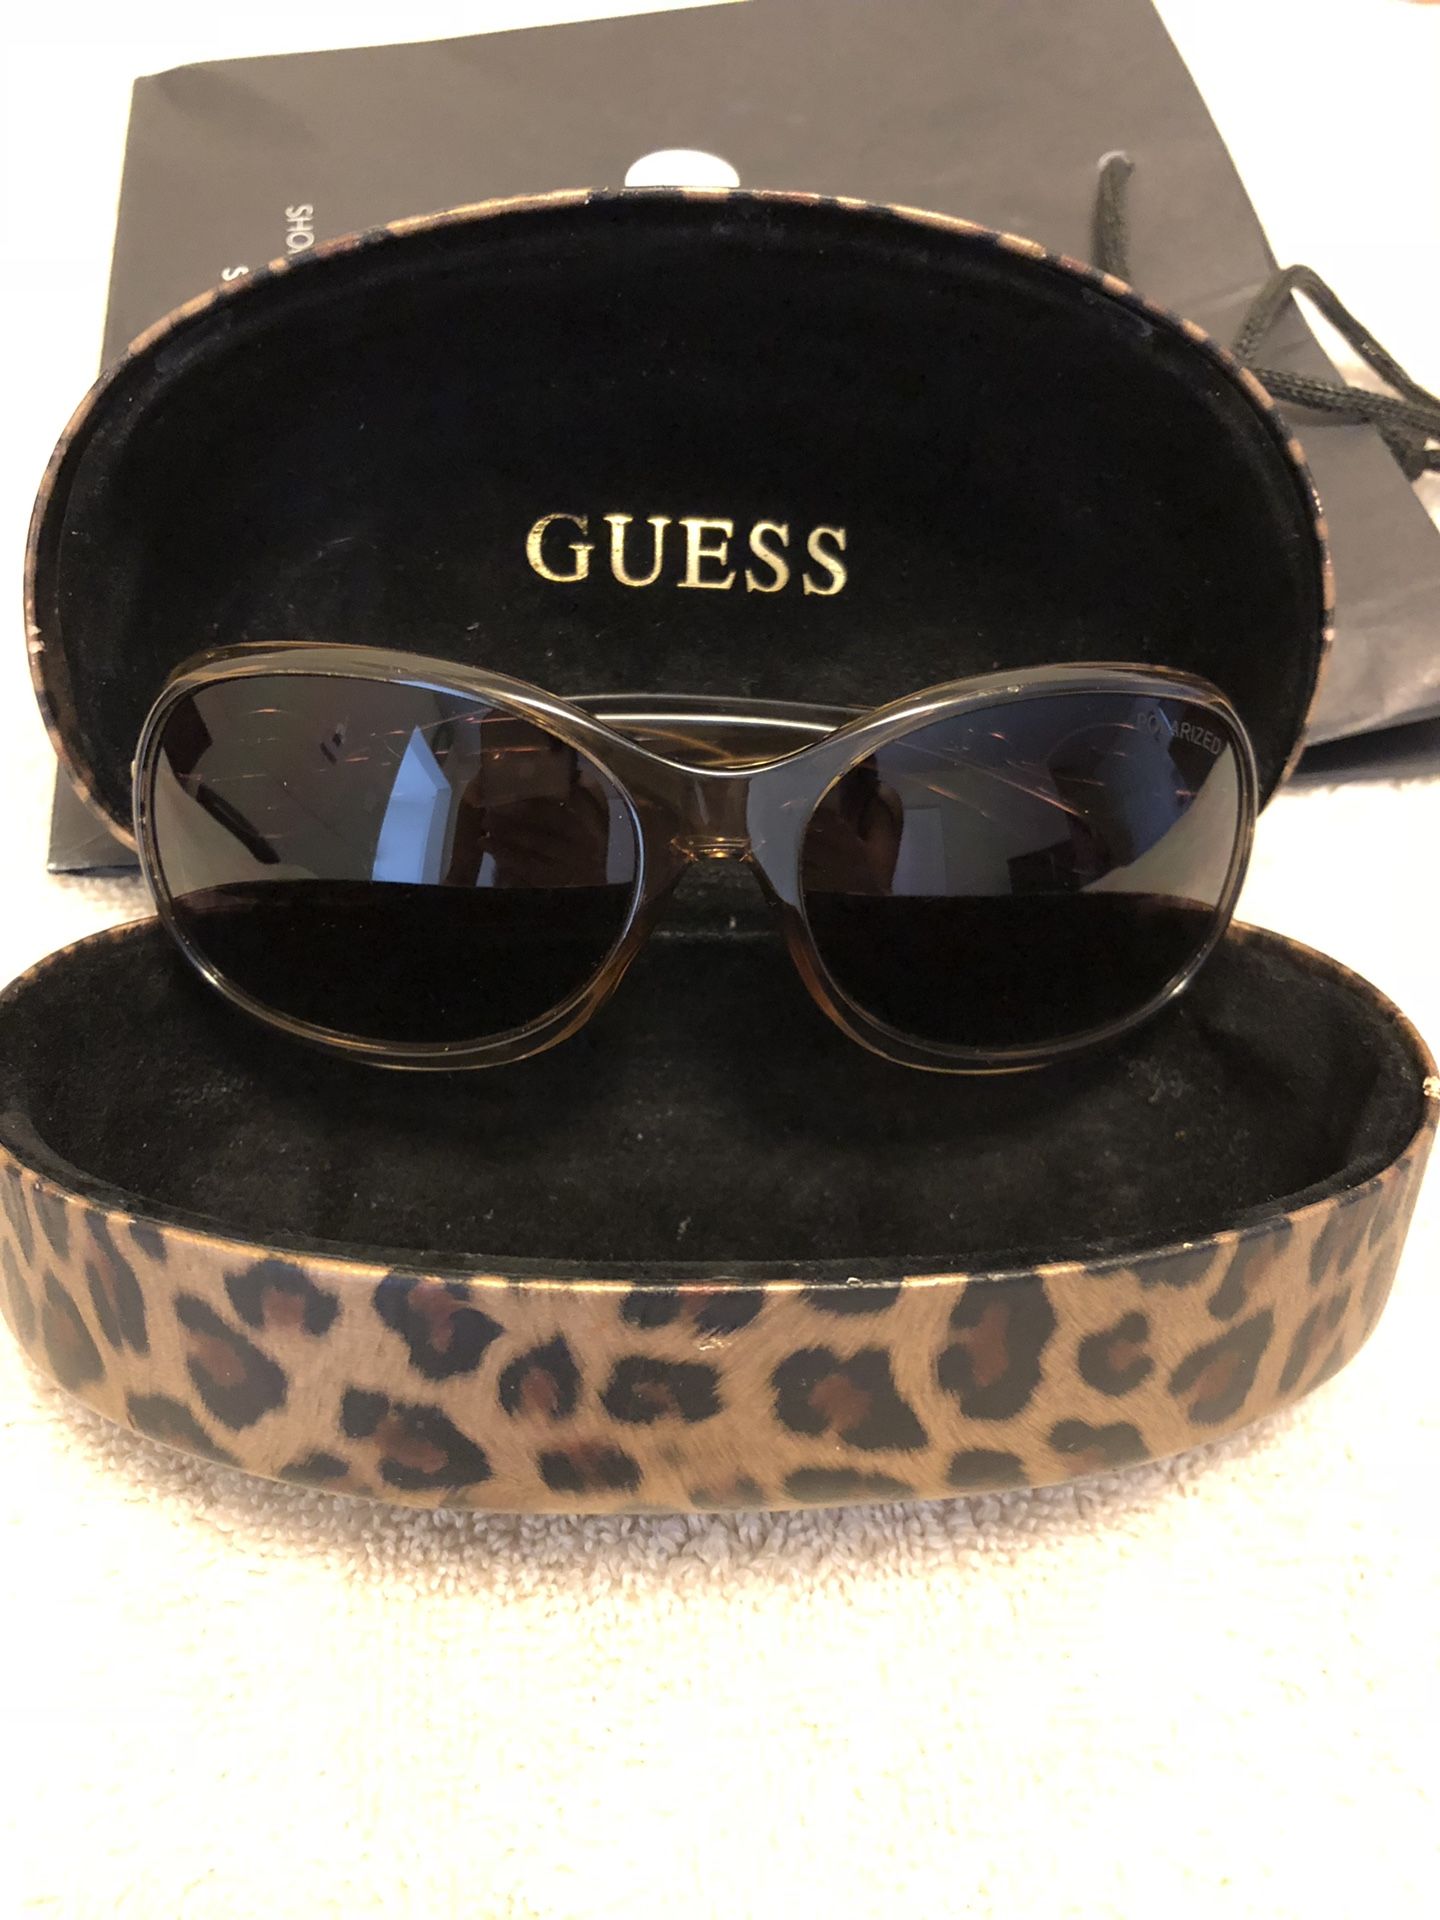 Women sunglasses Guess used brand